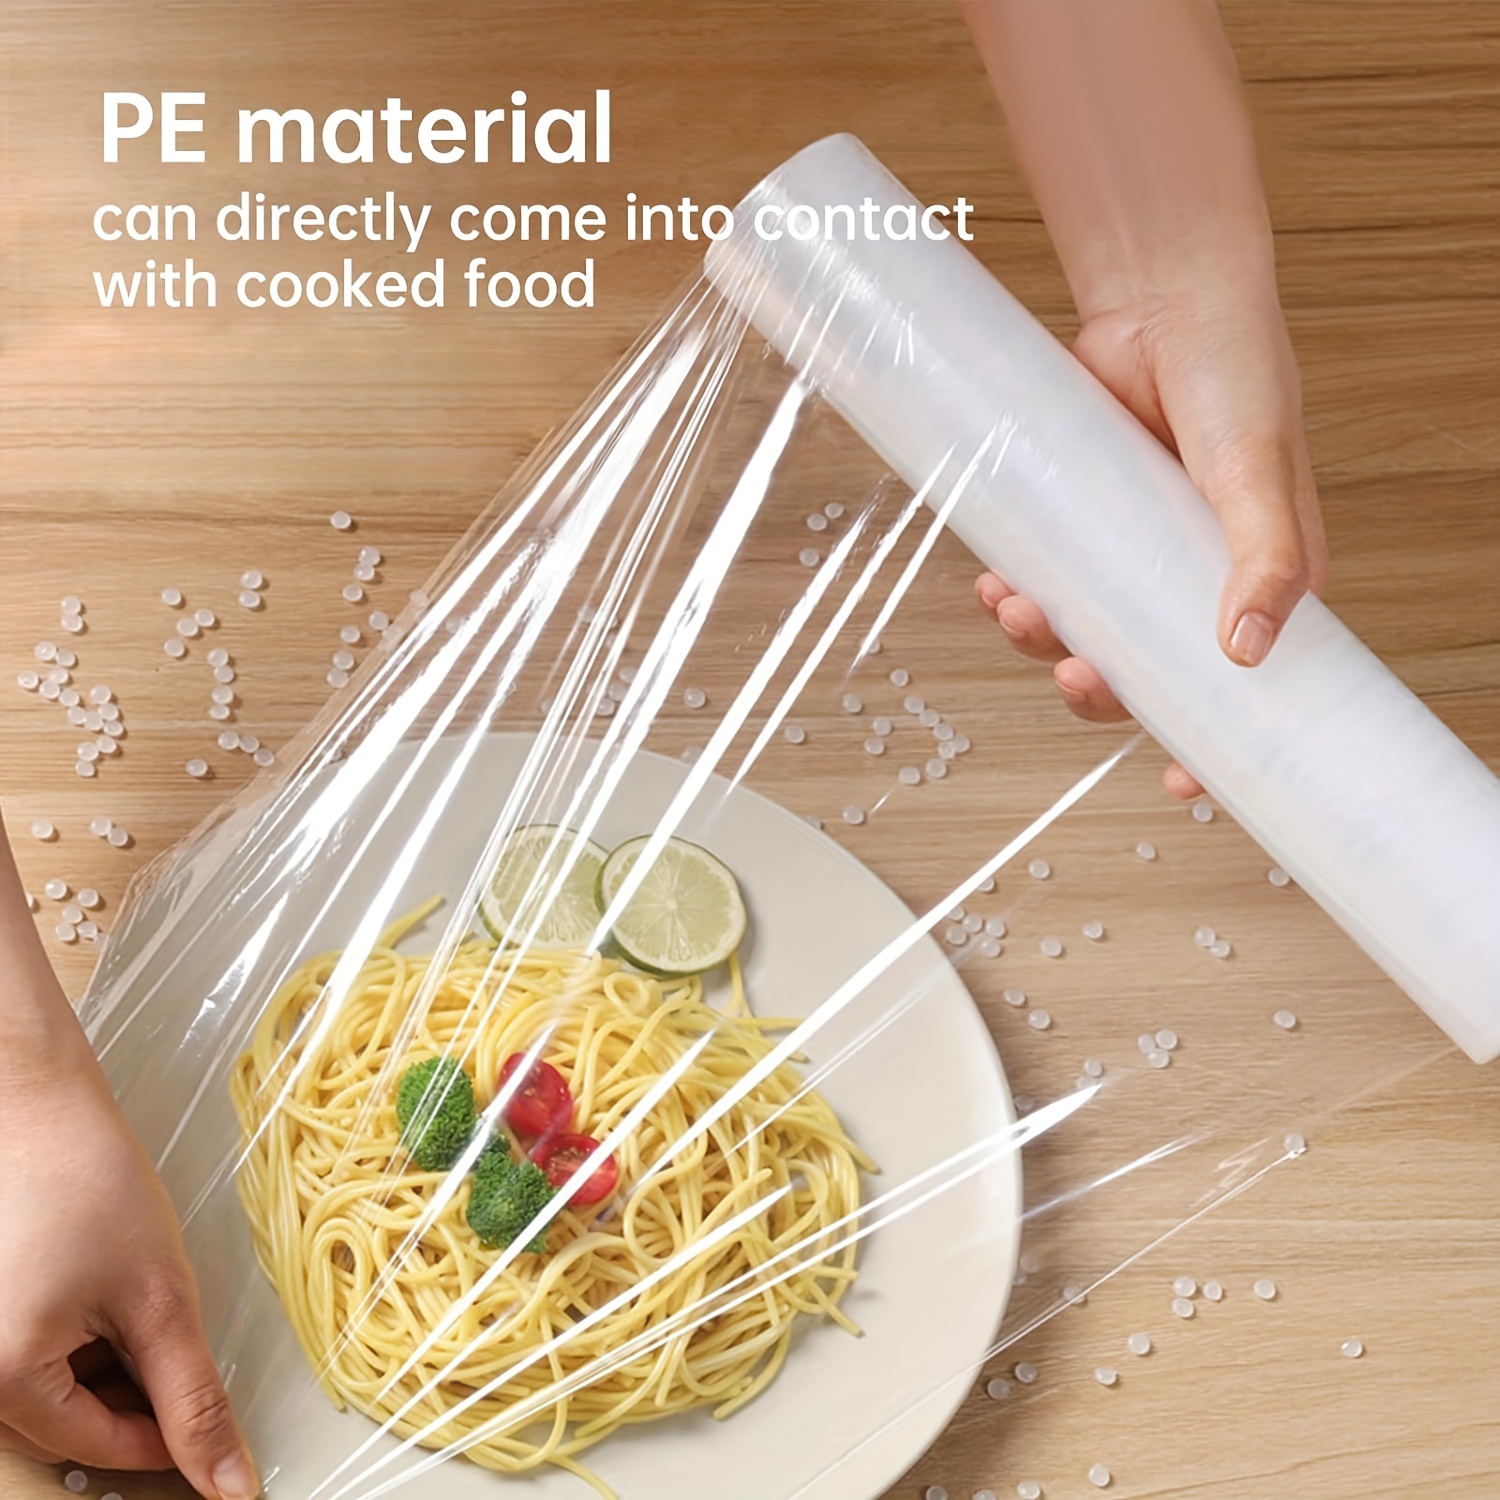 

1pc Pe Food Wrapper, 9.84 Inches X 200 Sheets, Food Preservation Film, Bpa Free Microwave Safe Kitchen Quick Cut Food Service Film, Kitchen Gadgets